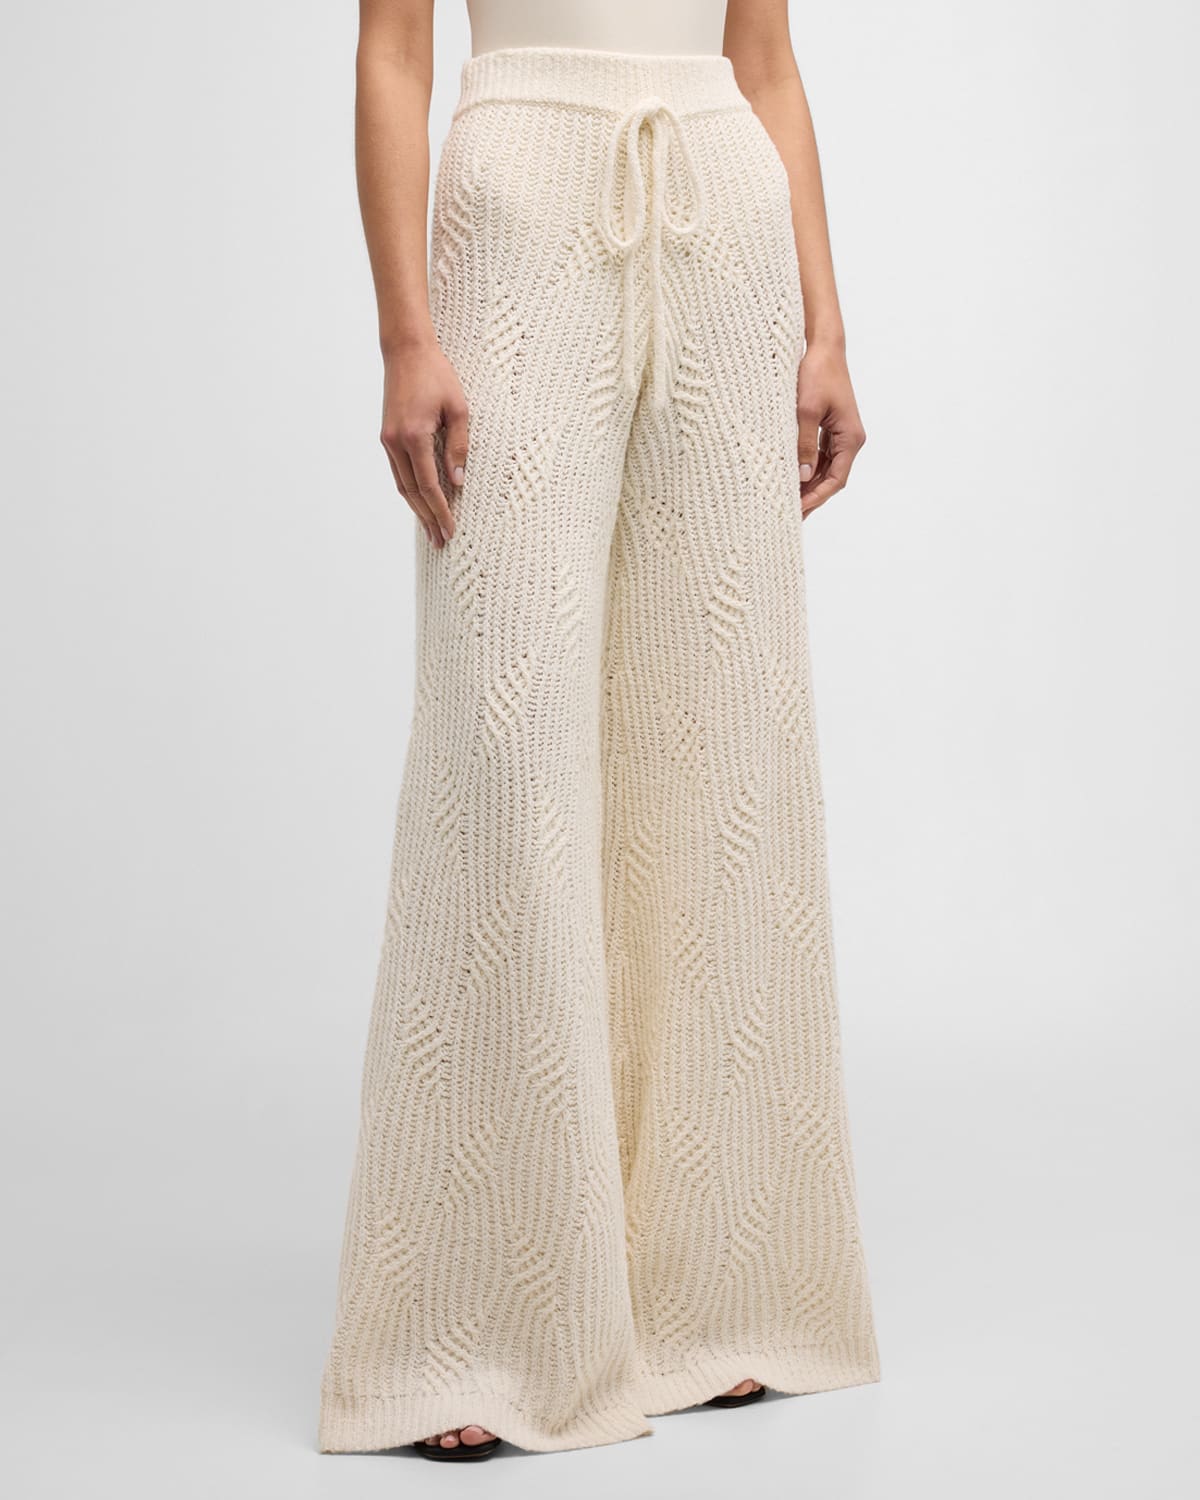 Hellessy Pelz Pull-on Knit Wide-leg Palazzo Pants In White